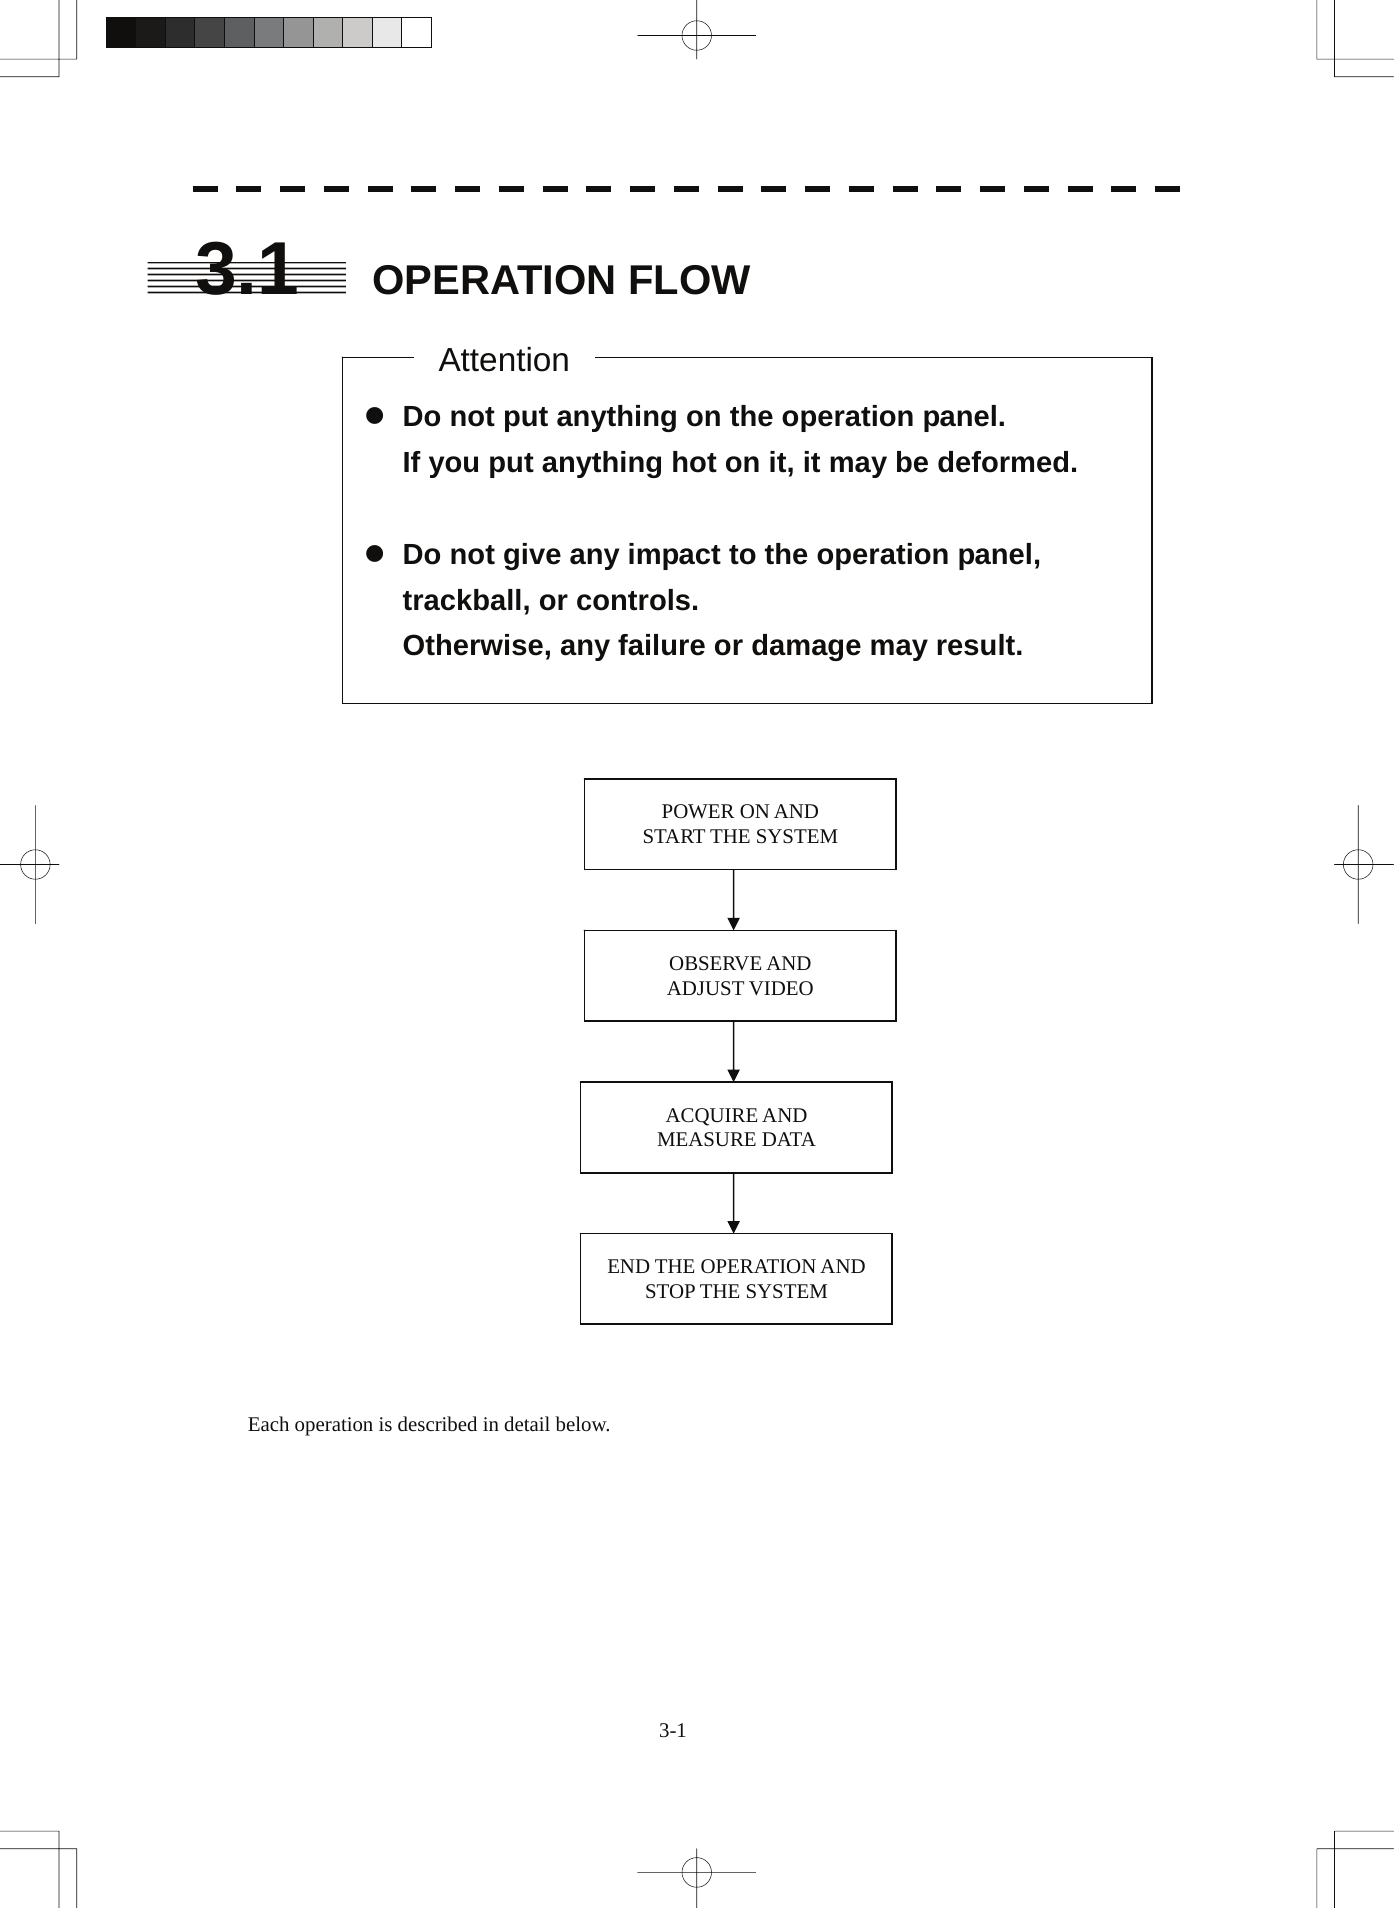  3-1 3.1  OPERATION FLOW                                         Each operation is described in detail below.  z Do not put anything on the operation panel. If you put anything hot on it, it may be deformed.  z Do not give any impact to the operation panel, trackball, or controls. Otherwise, any failure or damage may result. Attention POWER ON AND START THE SYSTEM OBSERVE AND   ADJUST VIDEO ACQUIRE AND   MEASURE DATA END THE OPERATION AND STOP THE SYSTEM 